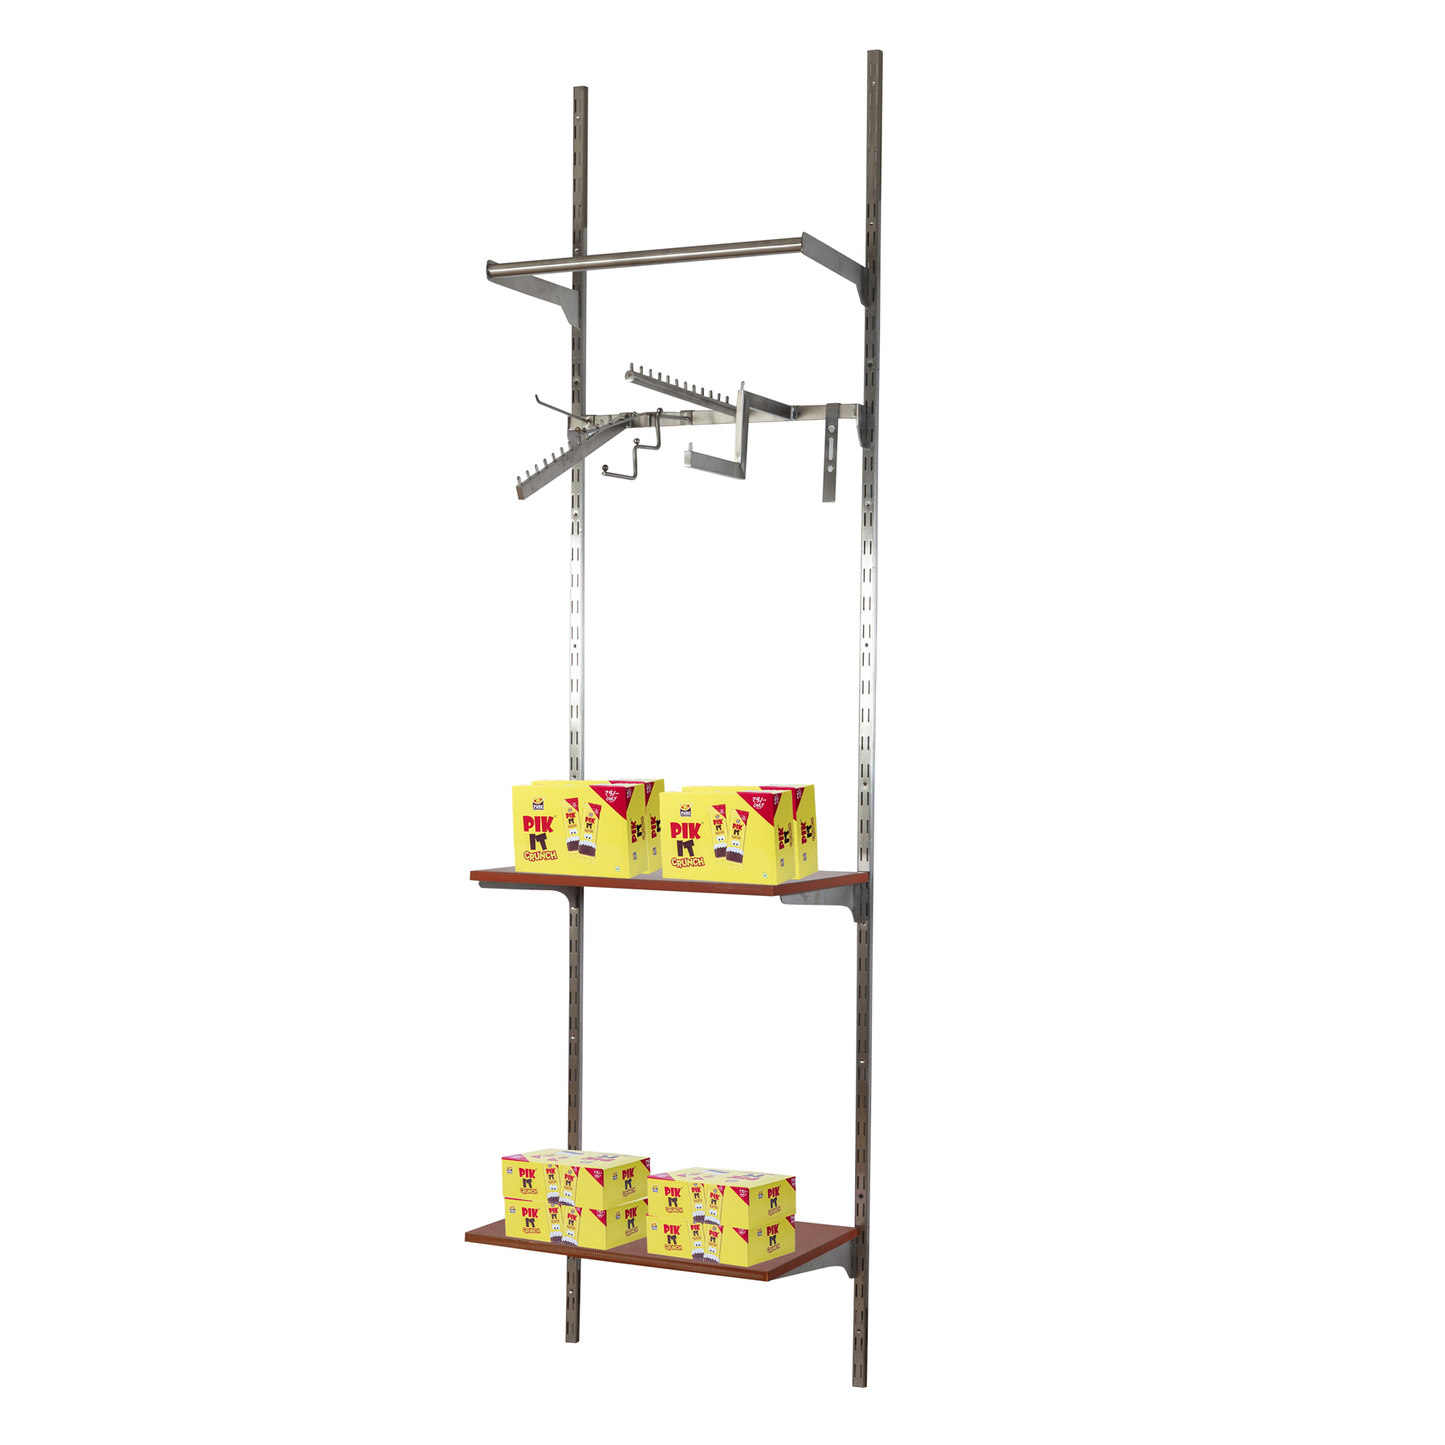 DuoVista - Double Channel Display System | Supermarket (Pack of 6)